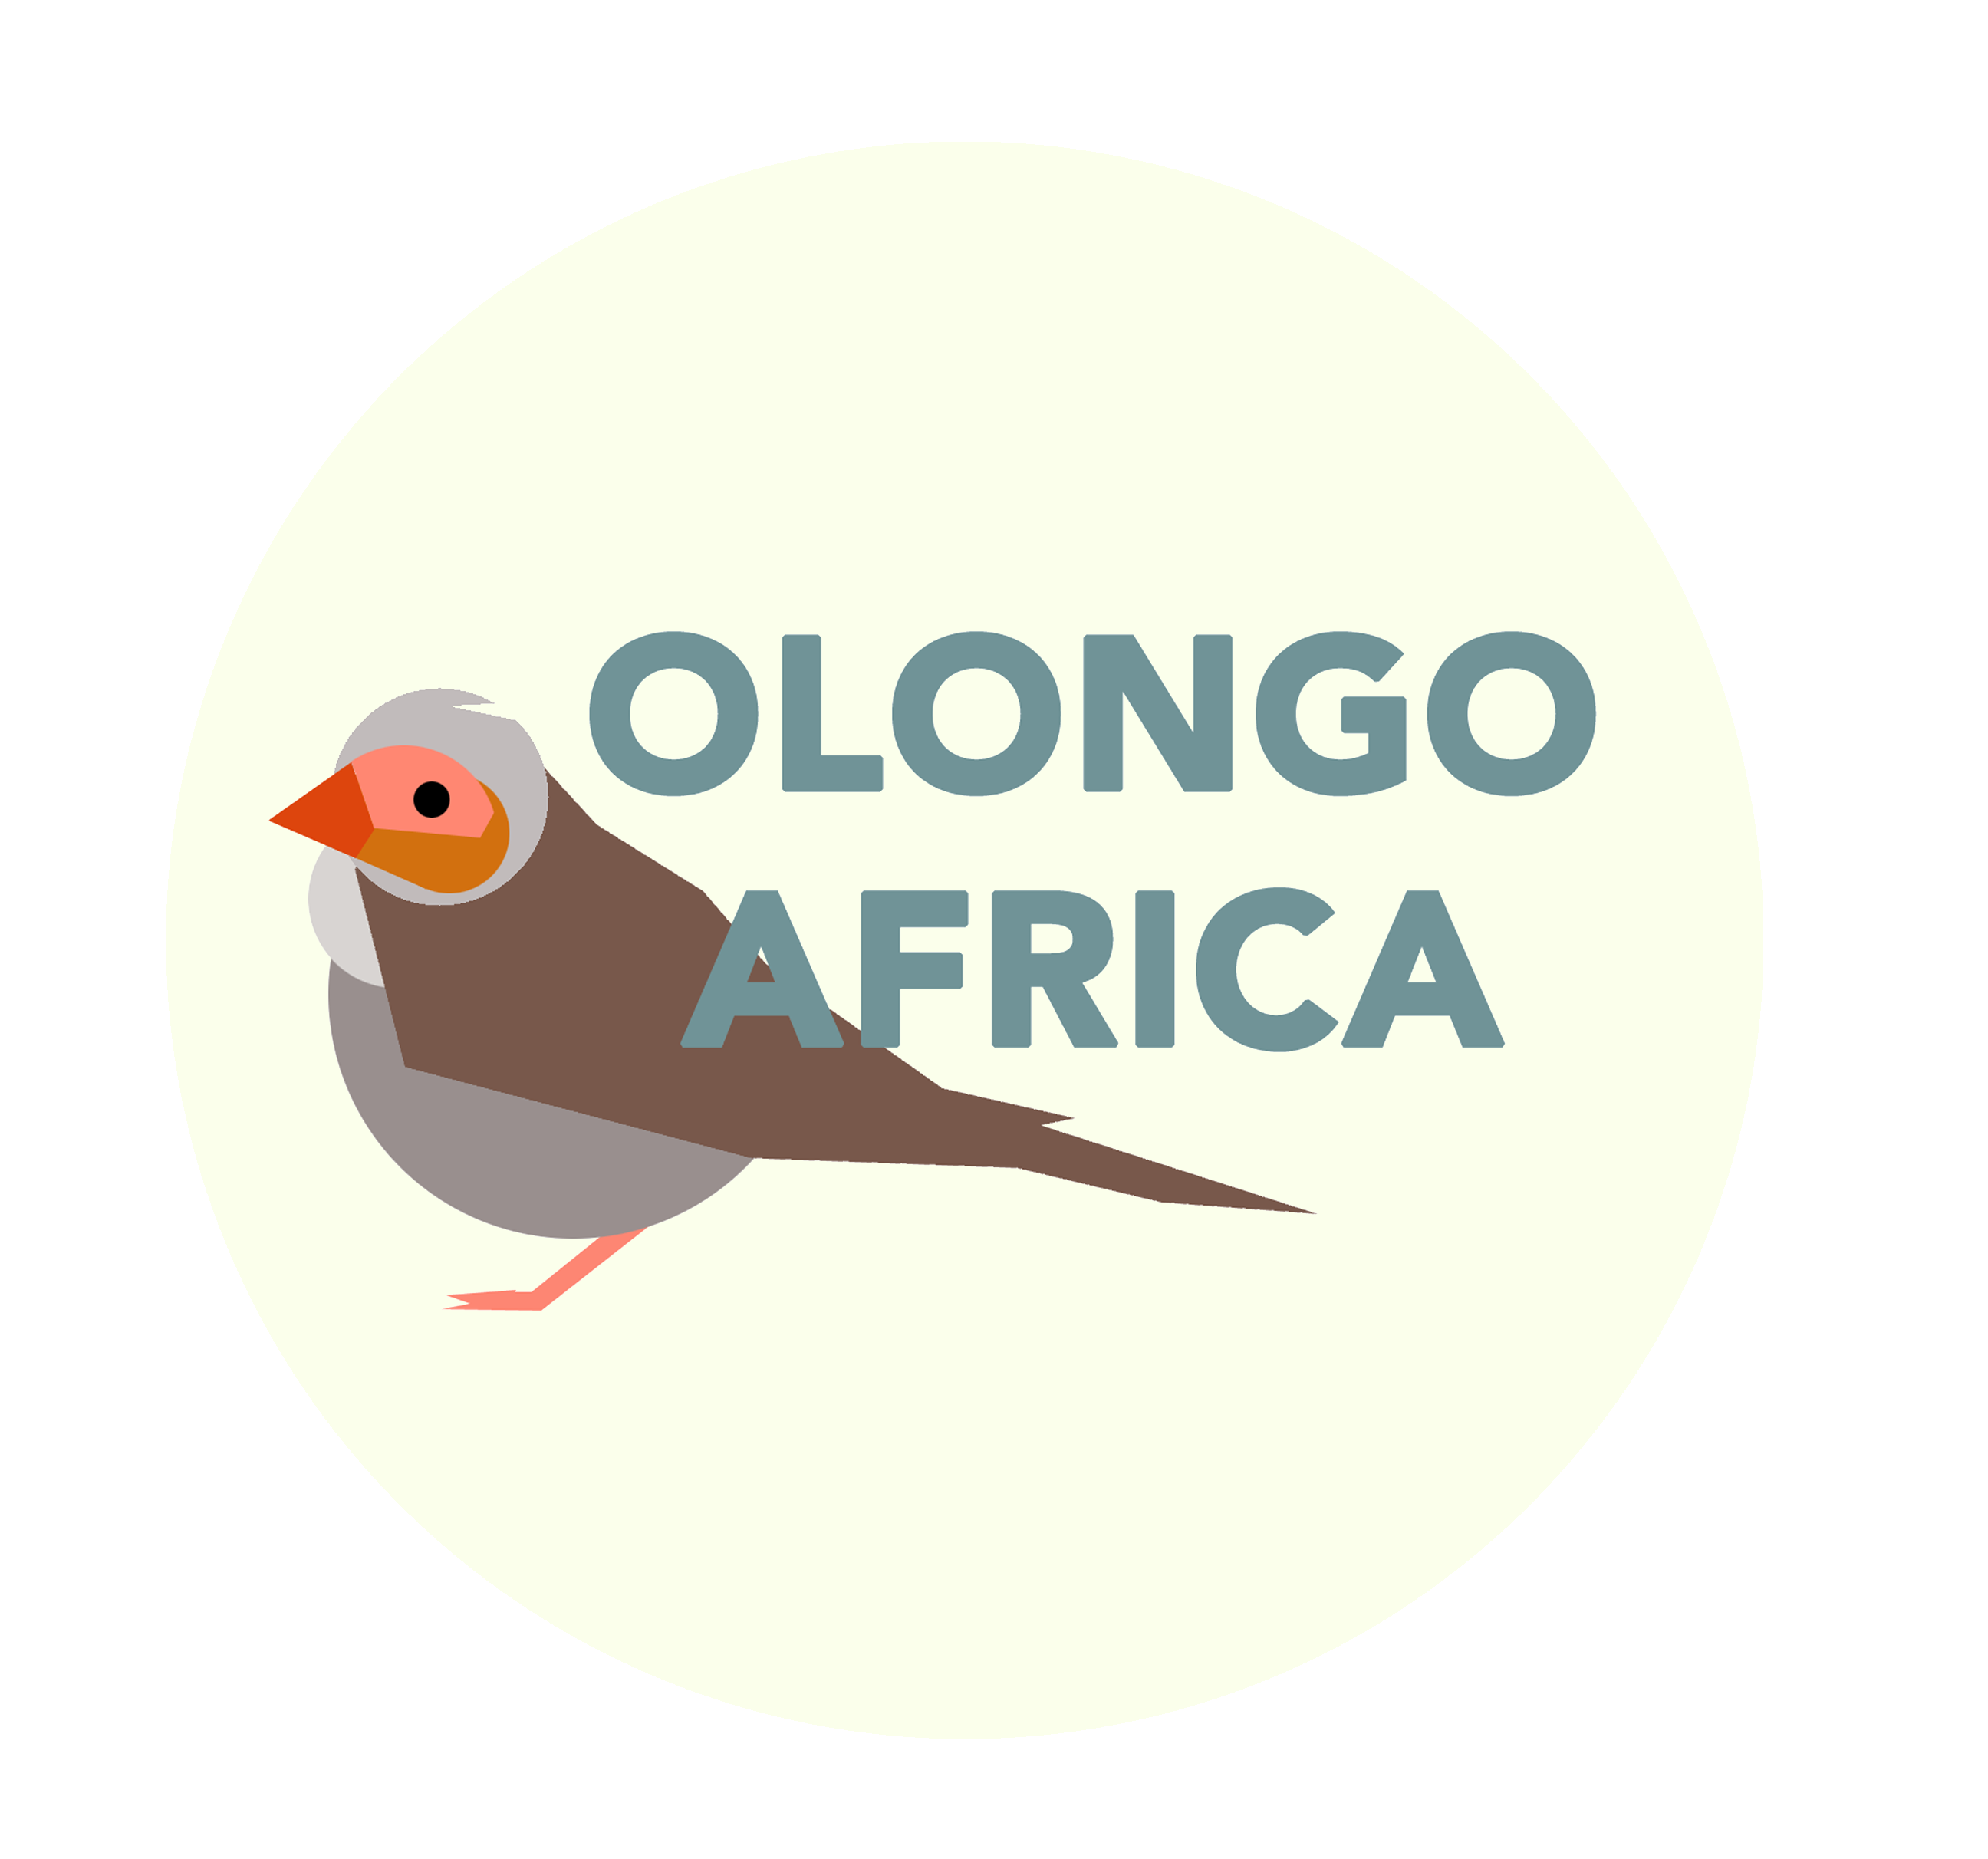 OlongoAfrica -- A community of opinion, literature, travelogue, journalism, and topical writing from Kọ́lá Túbọ̀sún, a Nigerian writer and editor.